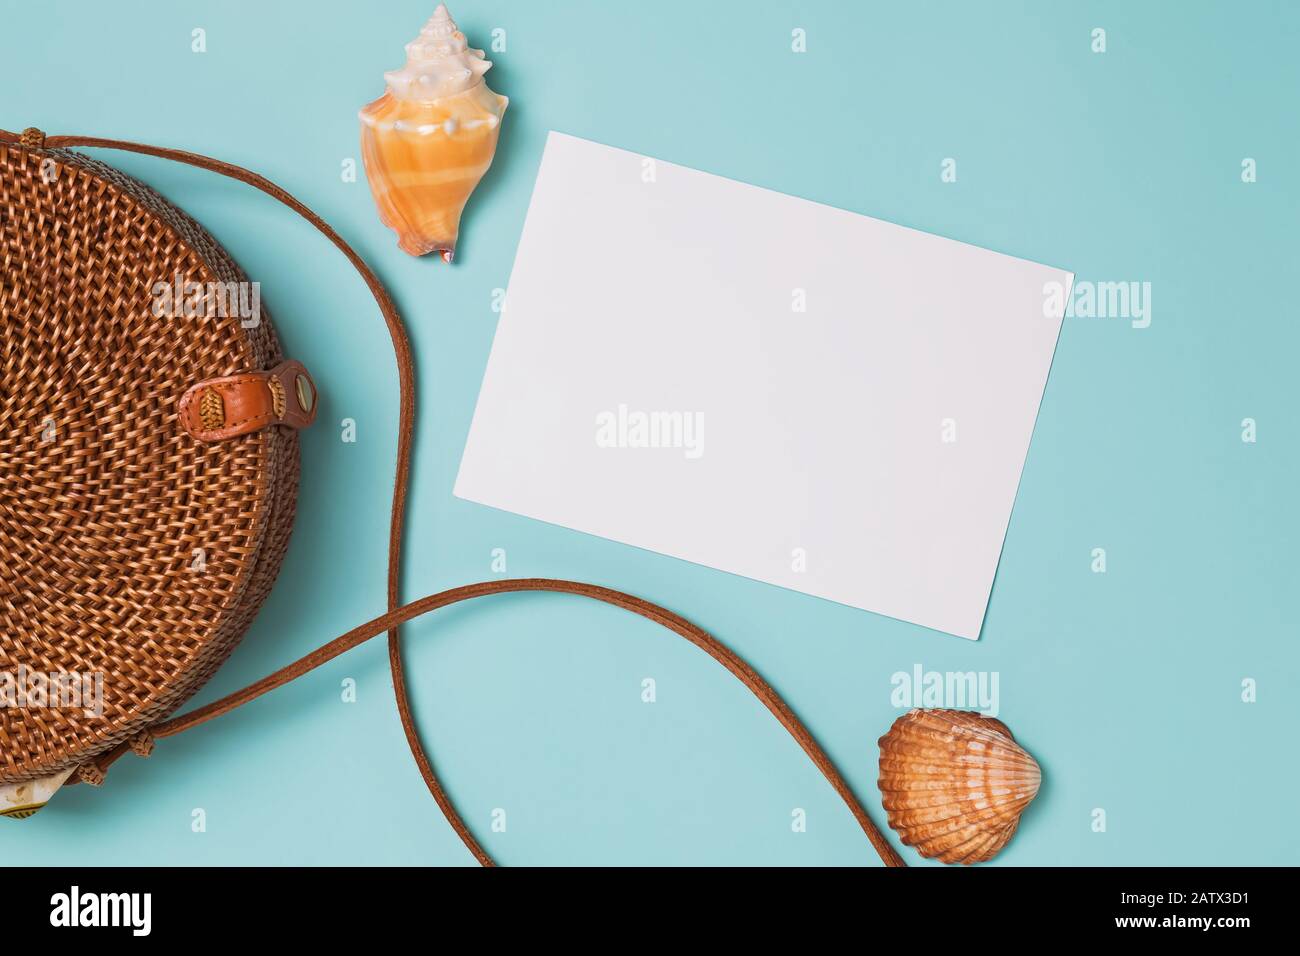 Seashells and ratan bag on blue background, top view. Summer vacation planning. Flat lay with empty paper, place for text Stock Photo